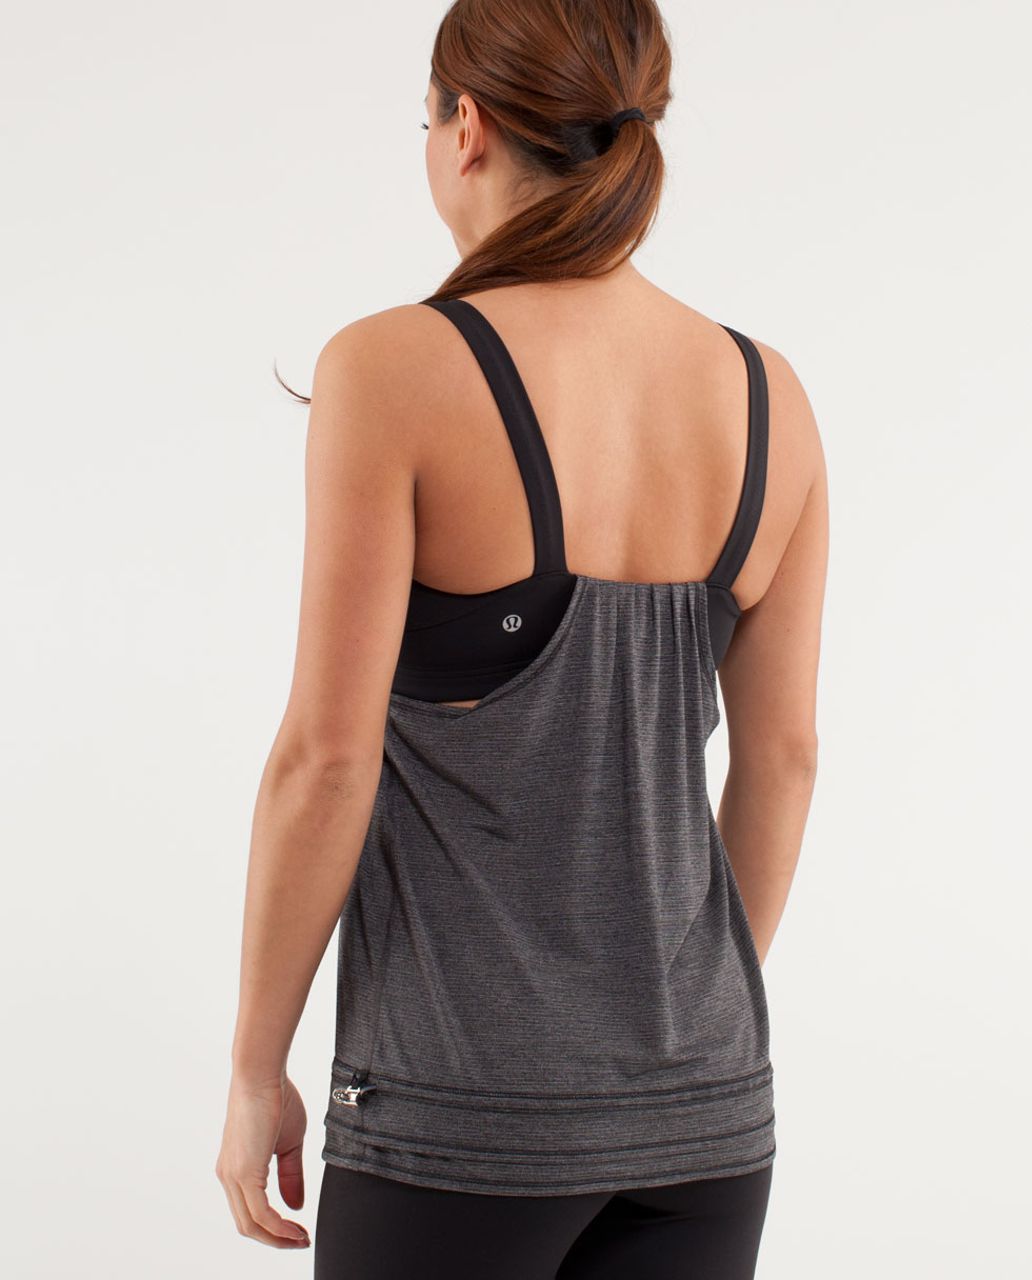 LULULEMON Run For Your Life Tank size 2 Grey Womens Top Built in Bra